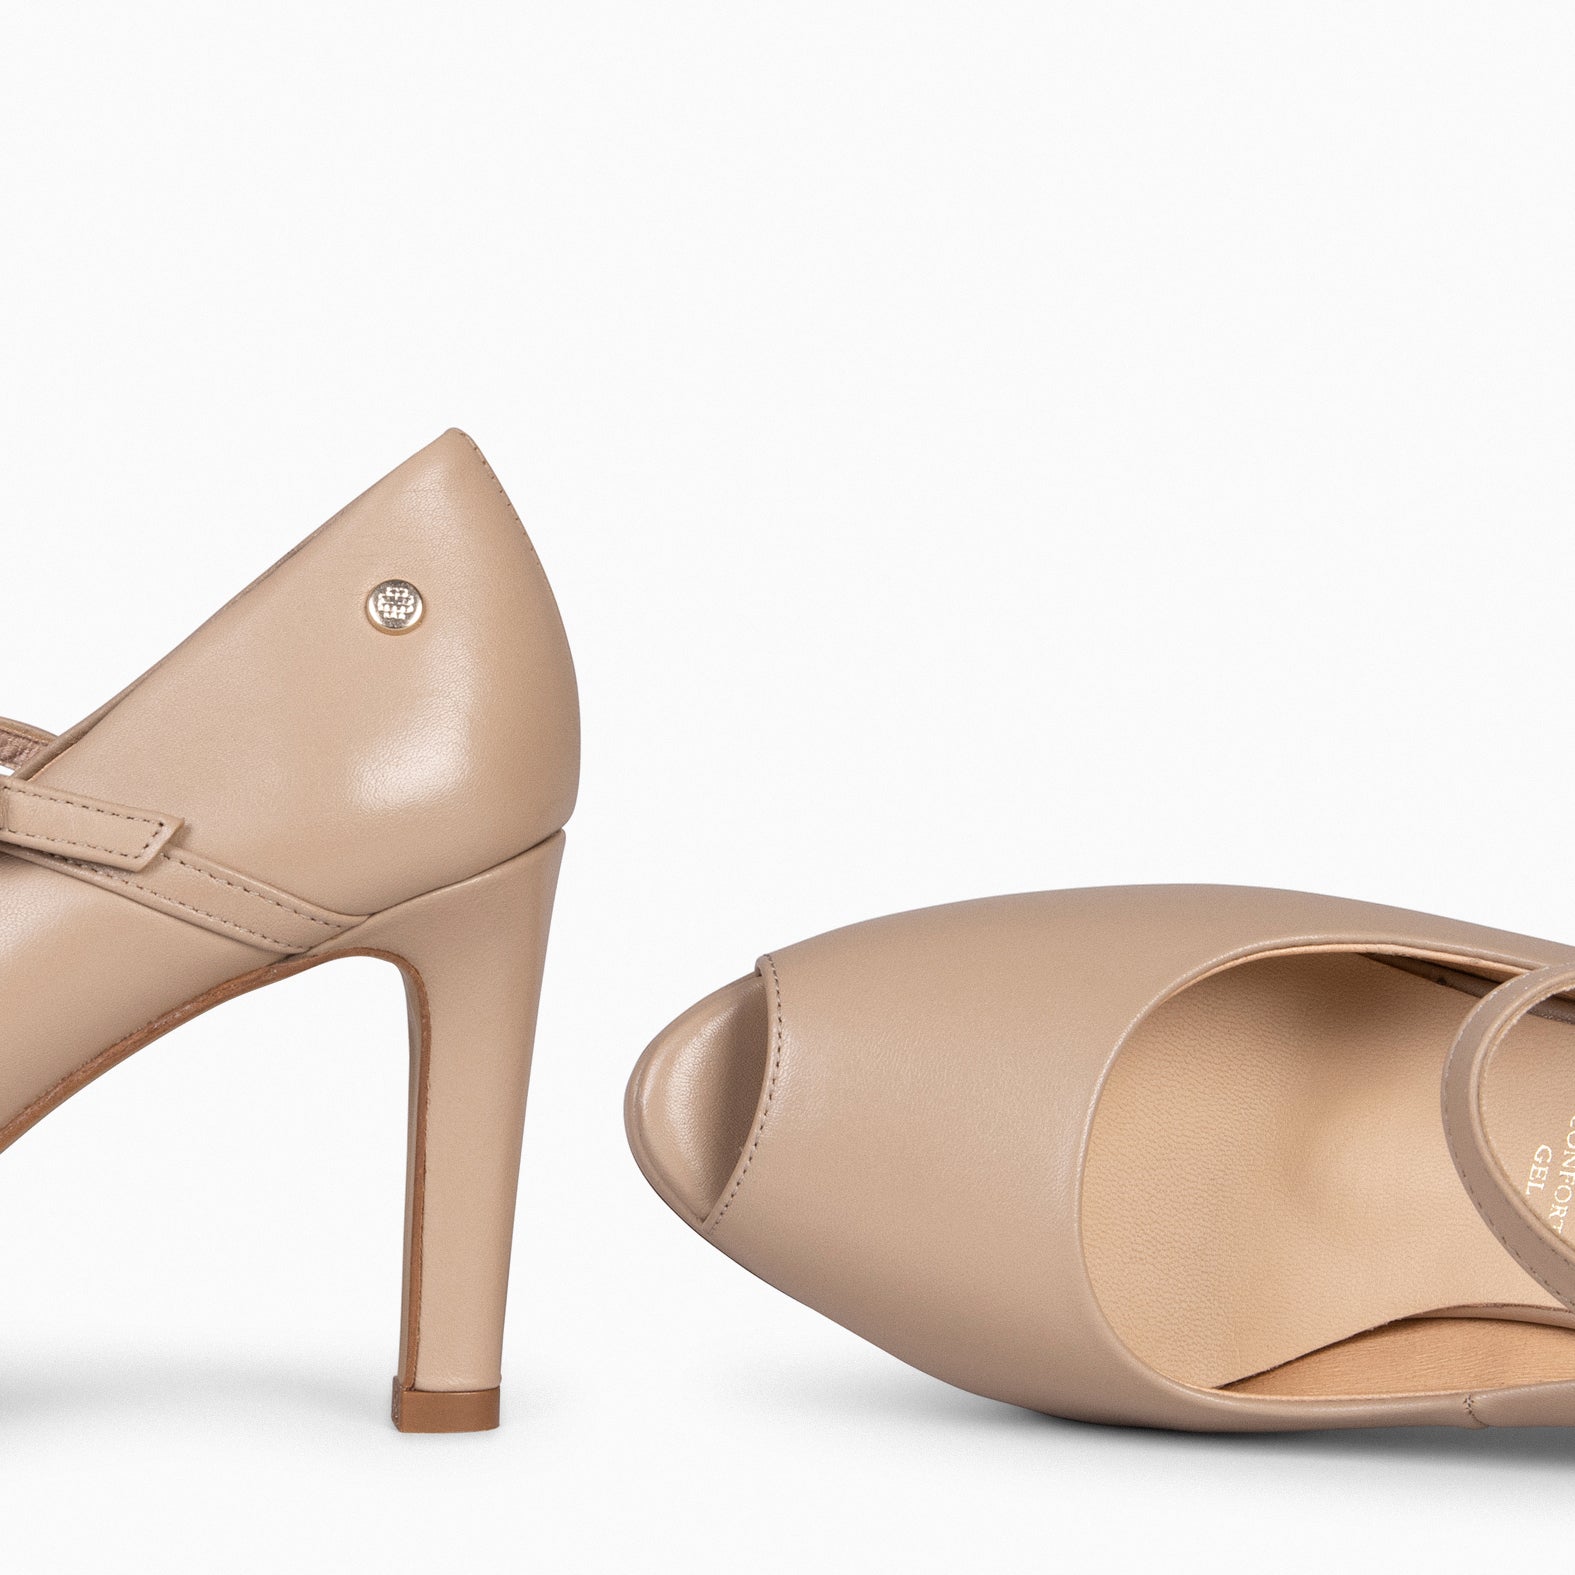 CASSIS – TAUPE peep-toe shoes